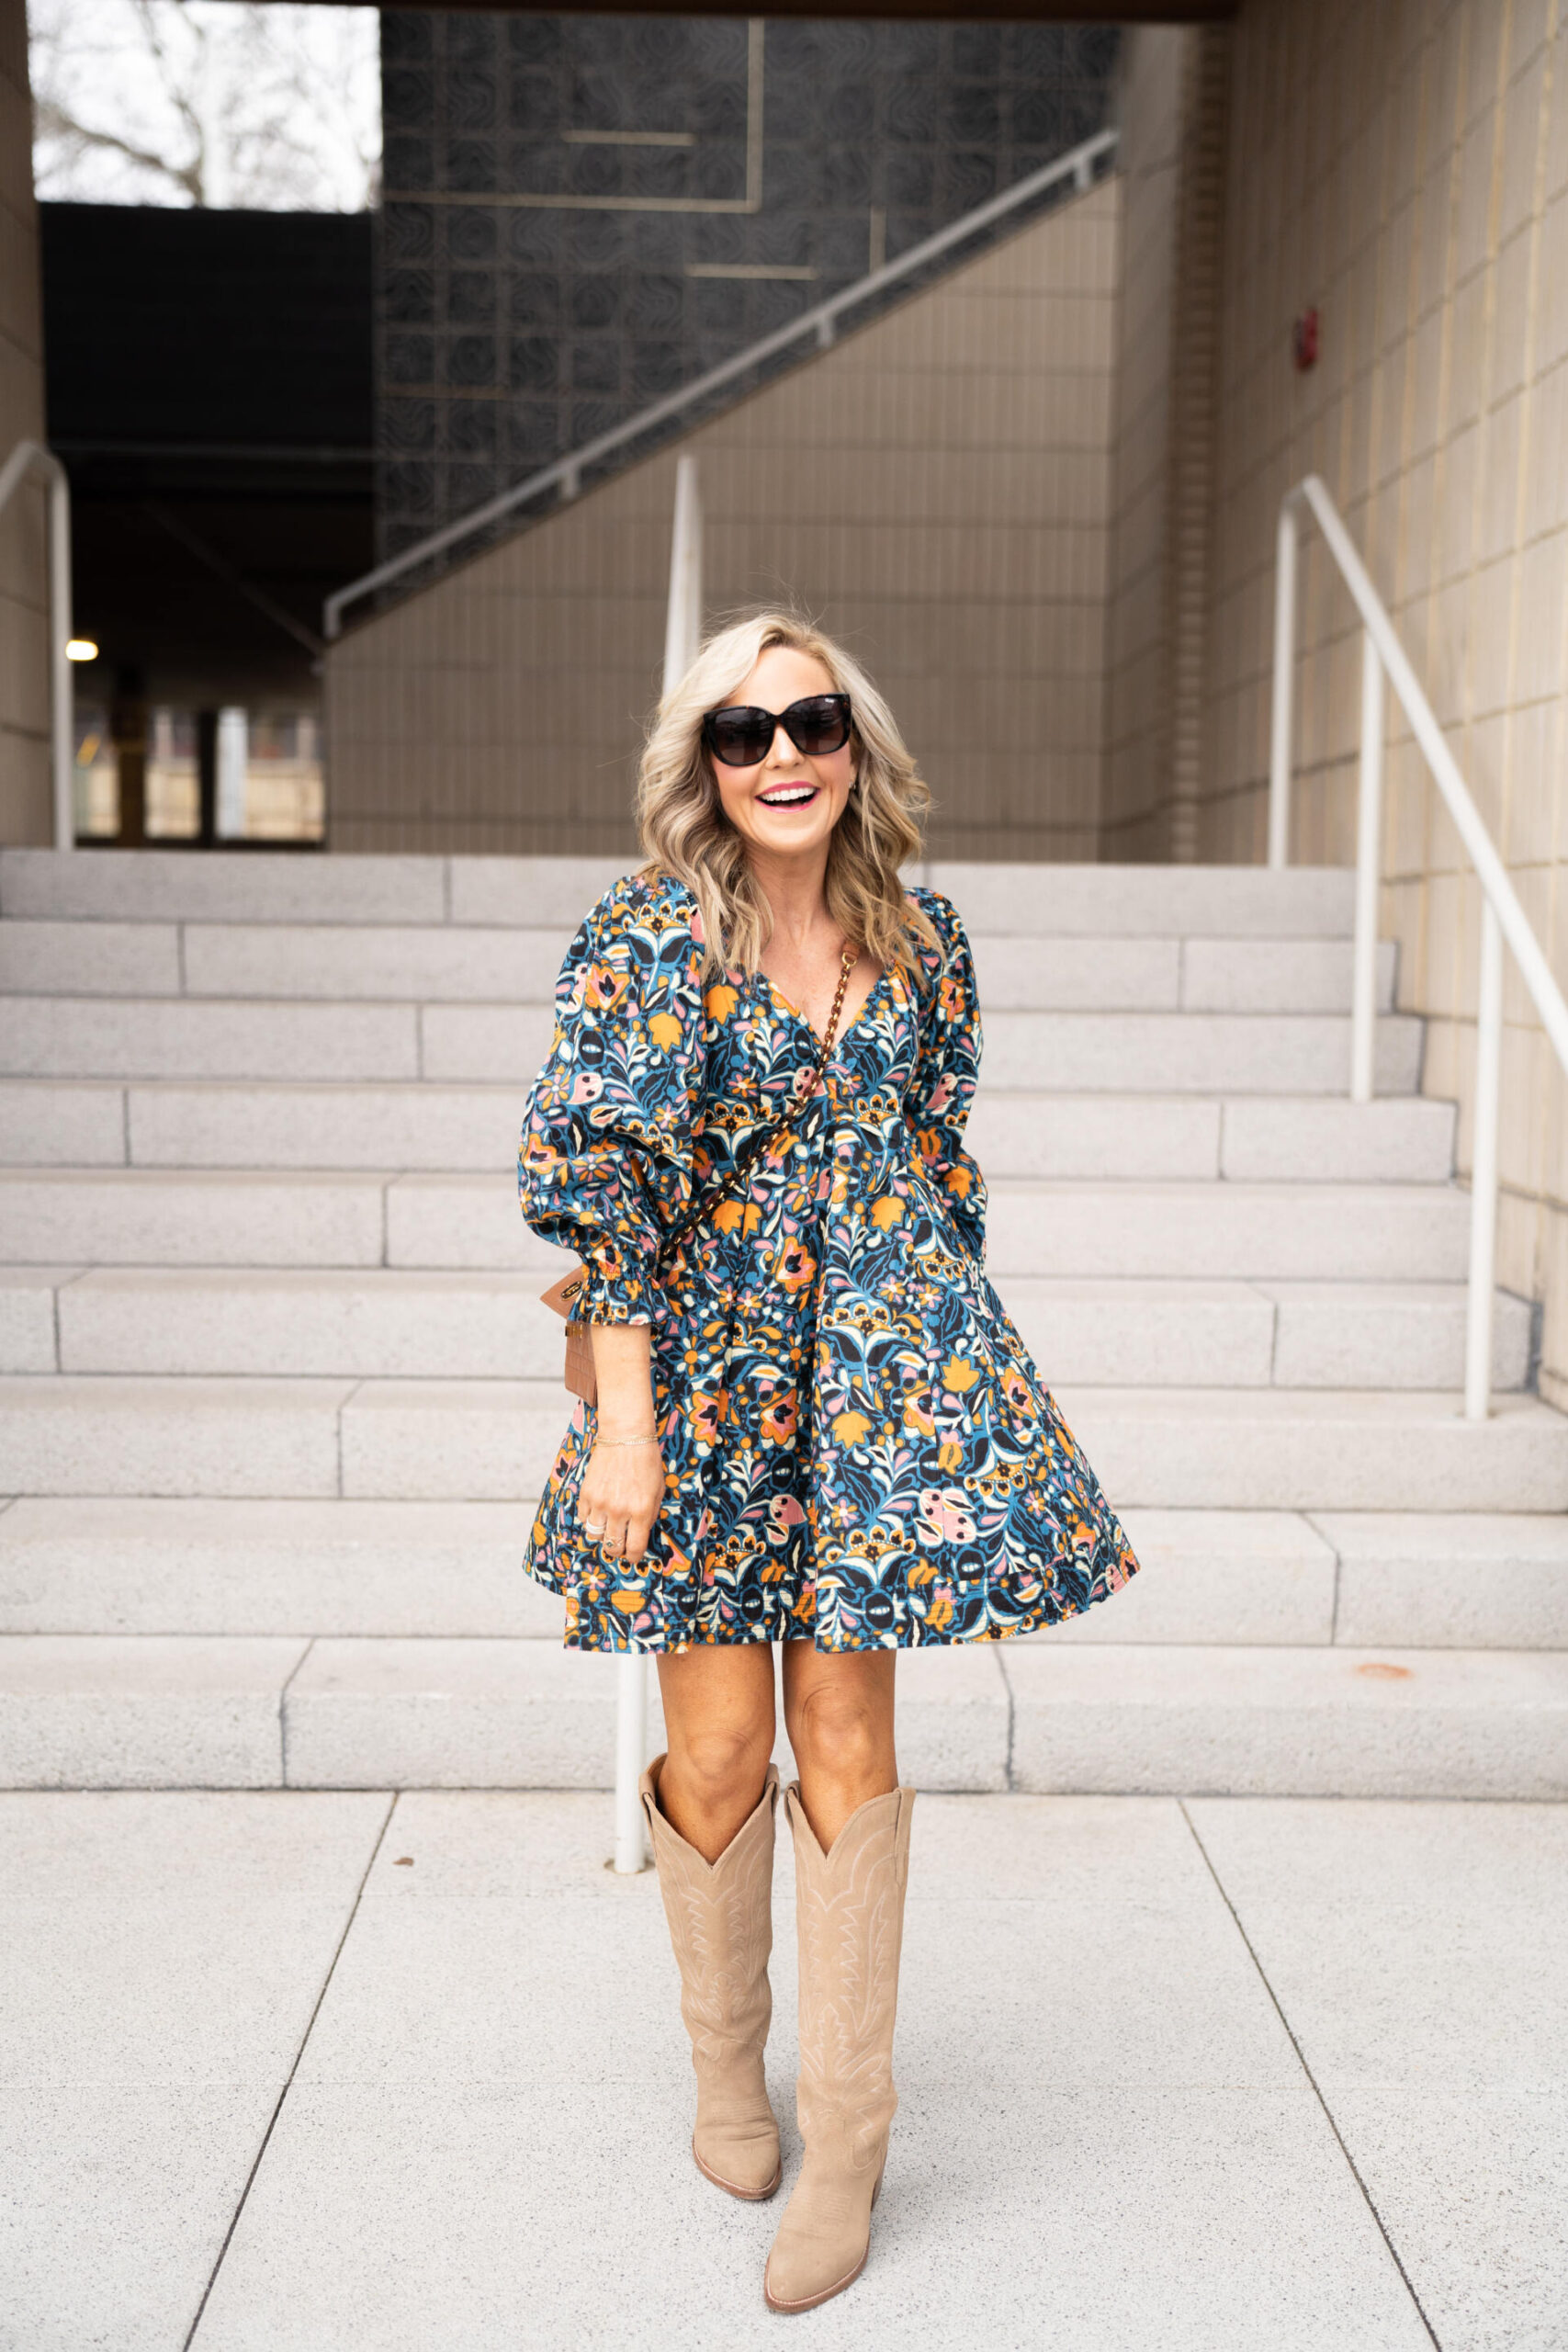 TALL-APPROVED DRESSES I'LL BE WEARING THIS SPRING